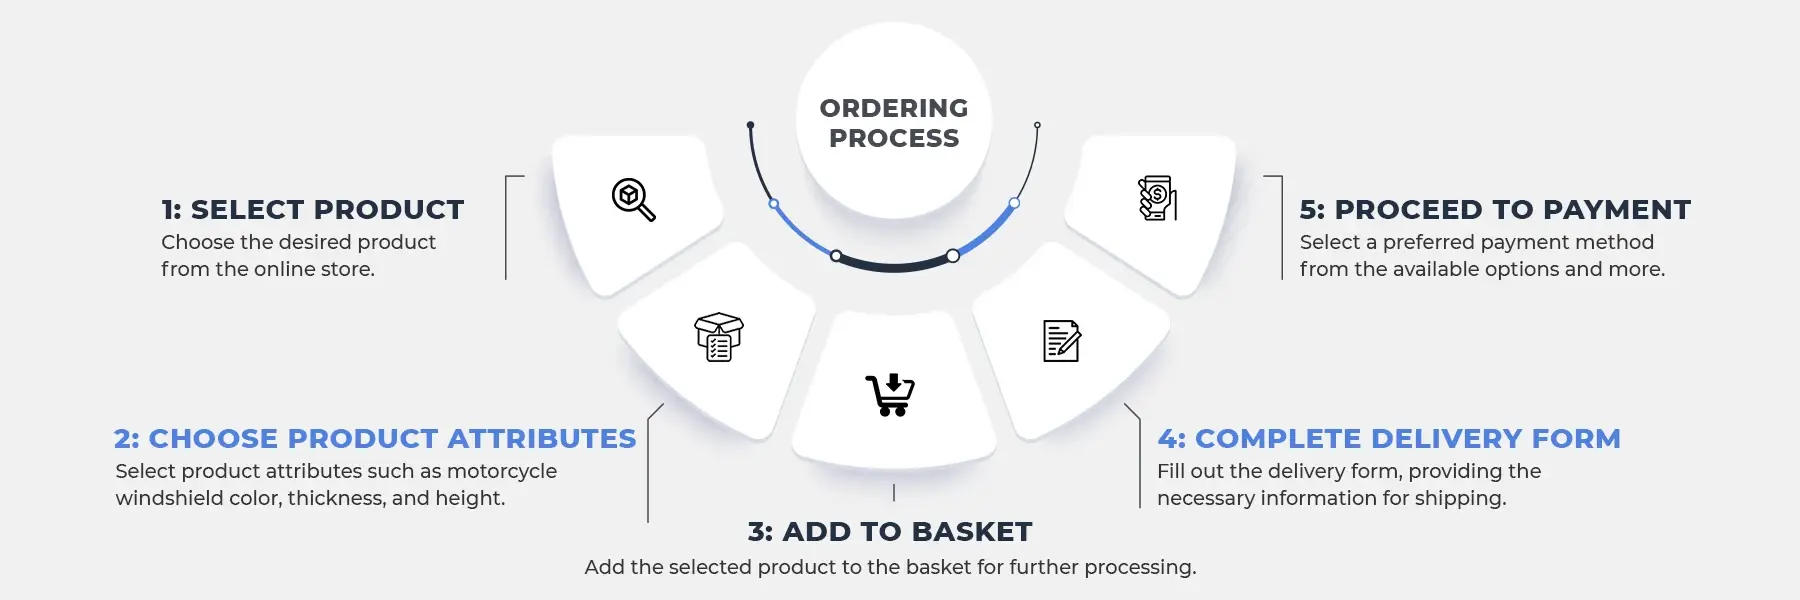 Ordering Process Information